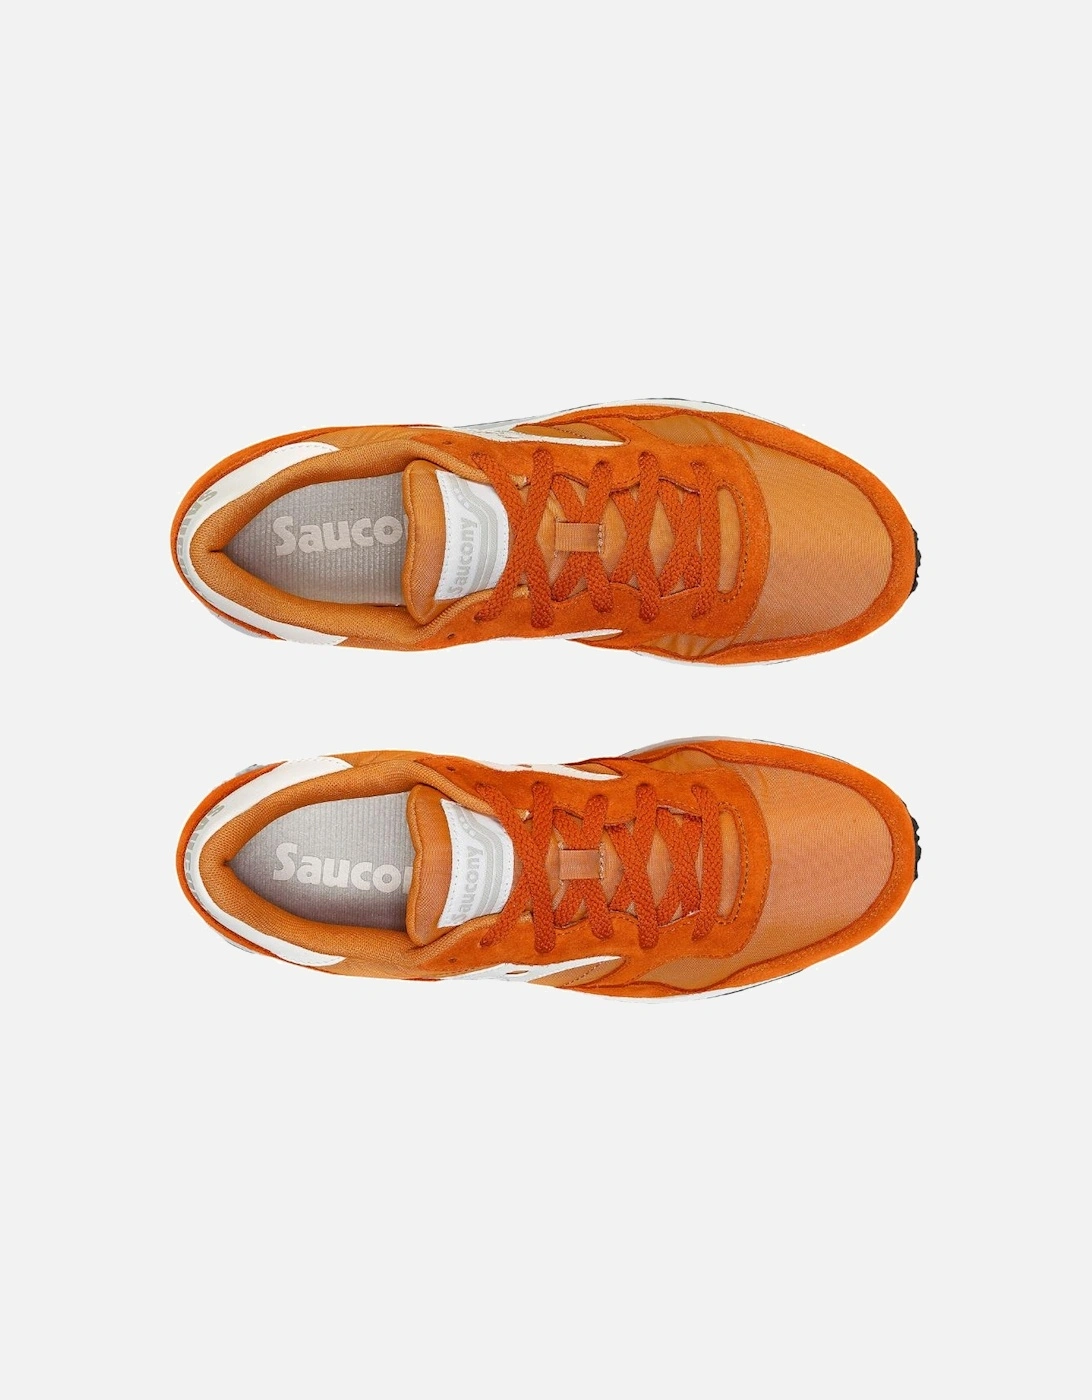 DXN Trainer - Rust/Off White